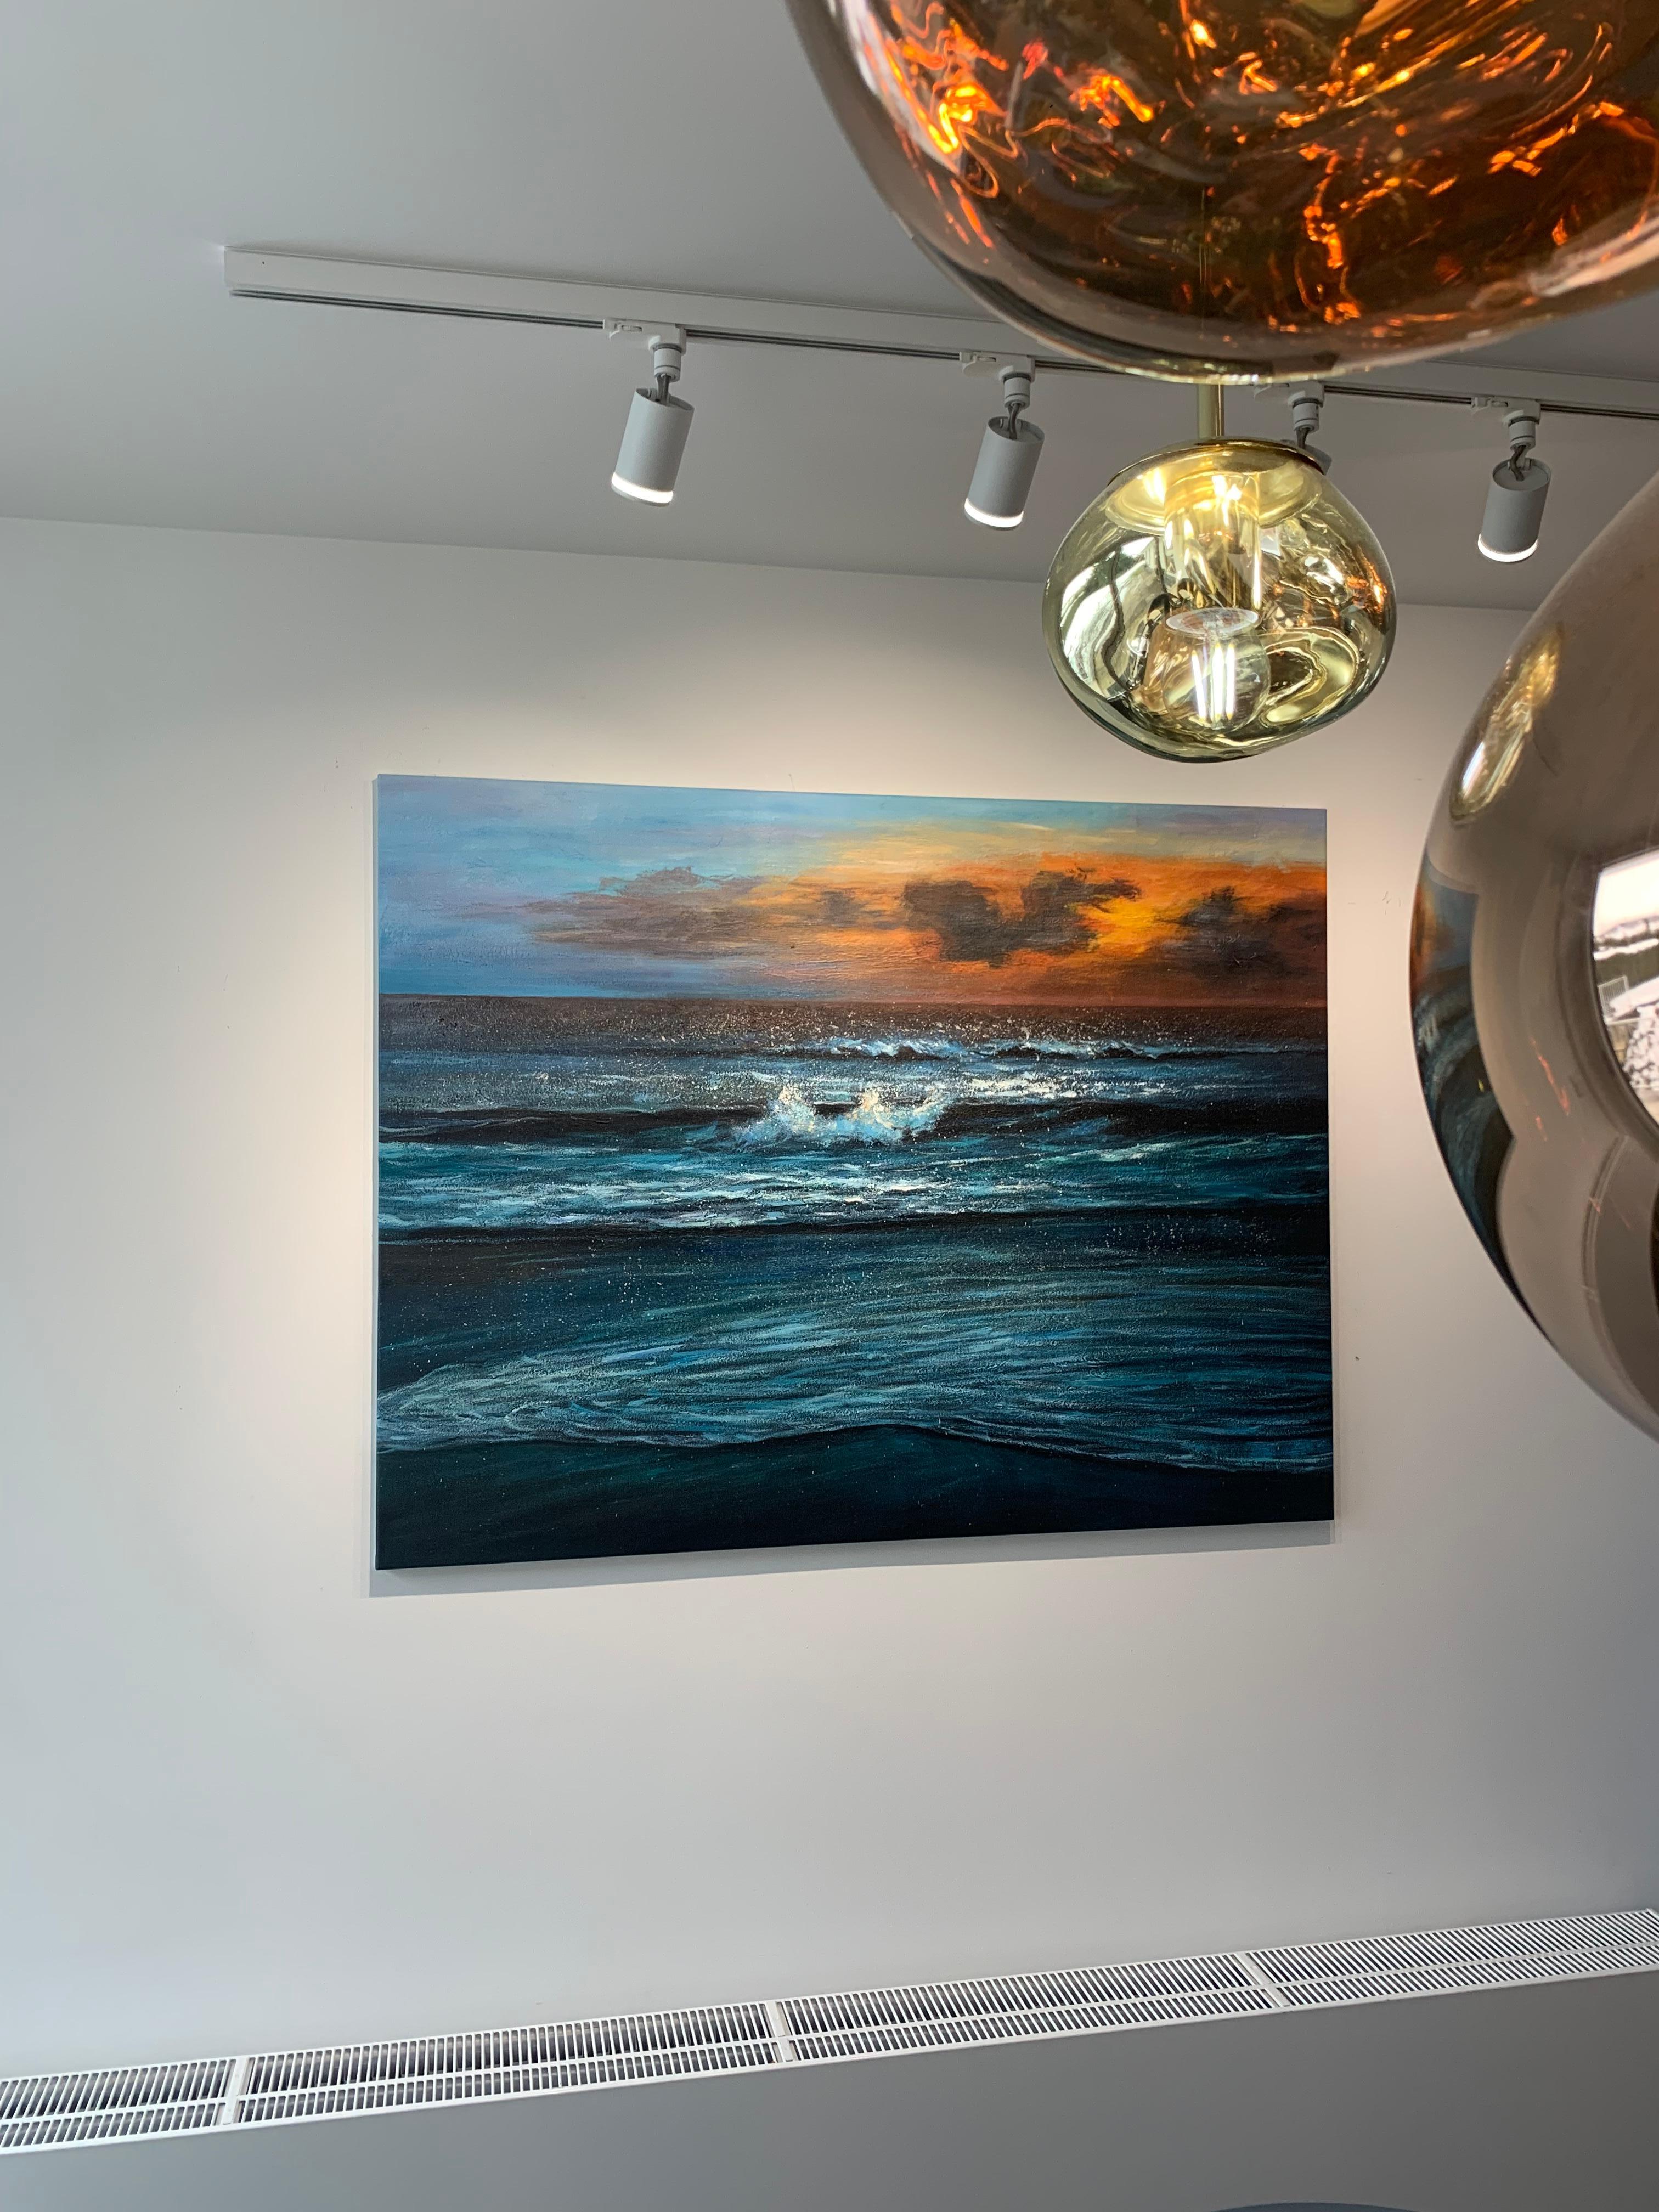 Beautiful sunset waves crashing peacefully at dusk. This contemporary landscape painting is full of vibrant blue colors and a warm sun, creating an atmospheric artwork. Reminding us of days spent on the beach.
Oil painting on canvas.